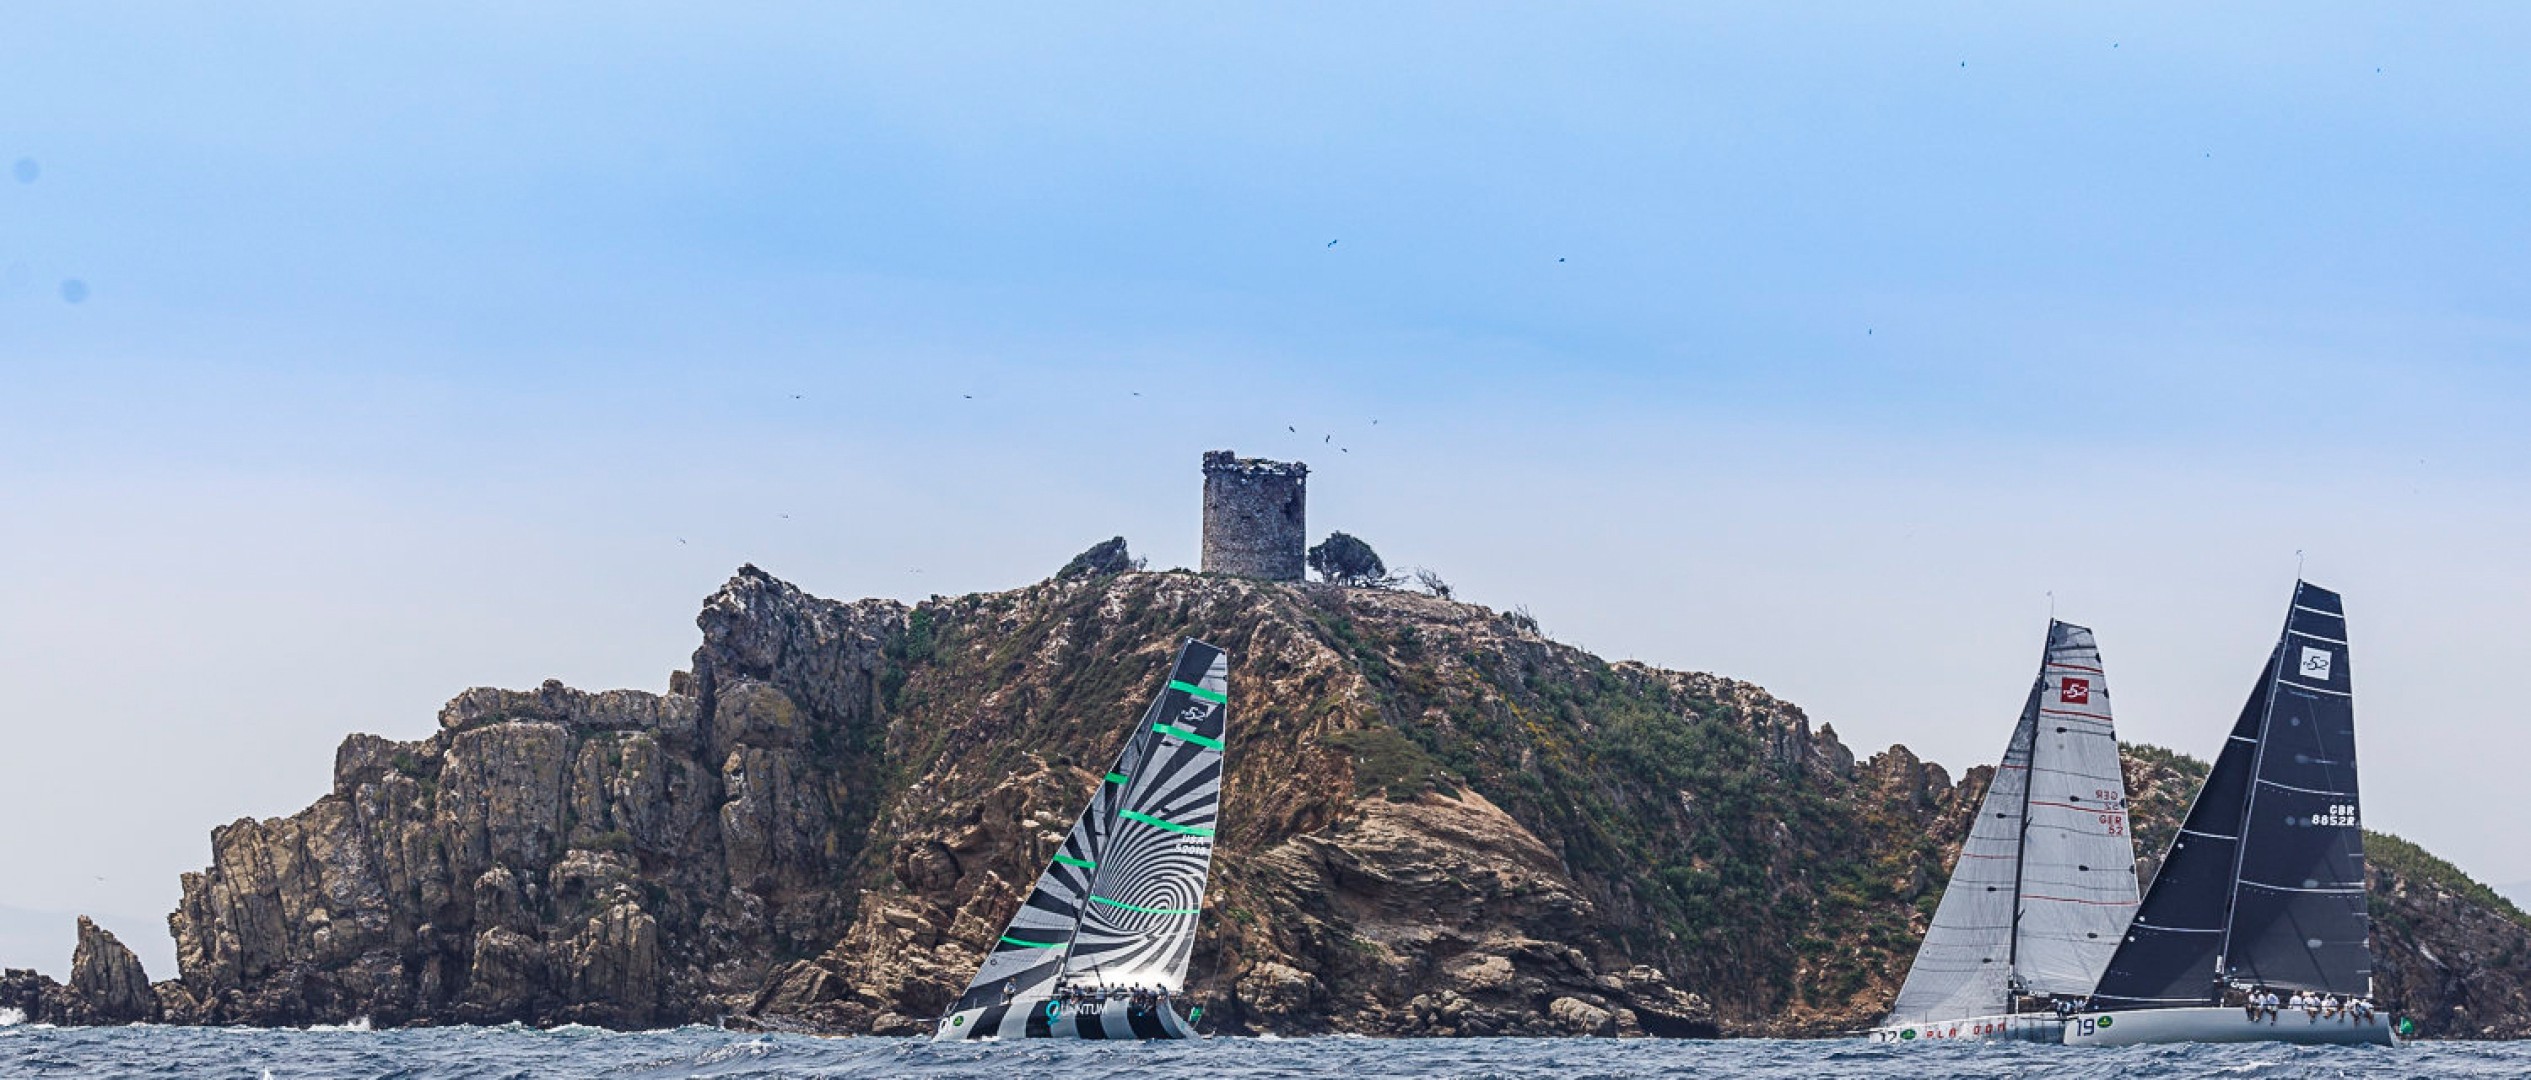 52 Super Series Royal Cup comes to Tuscany